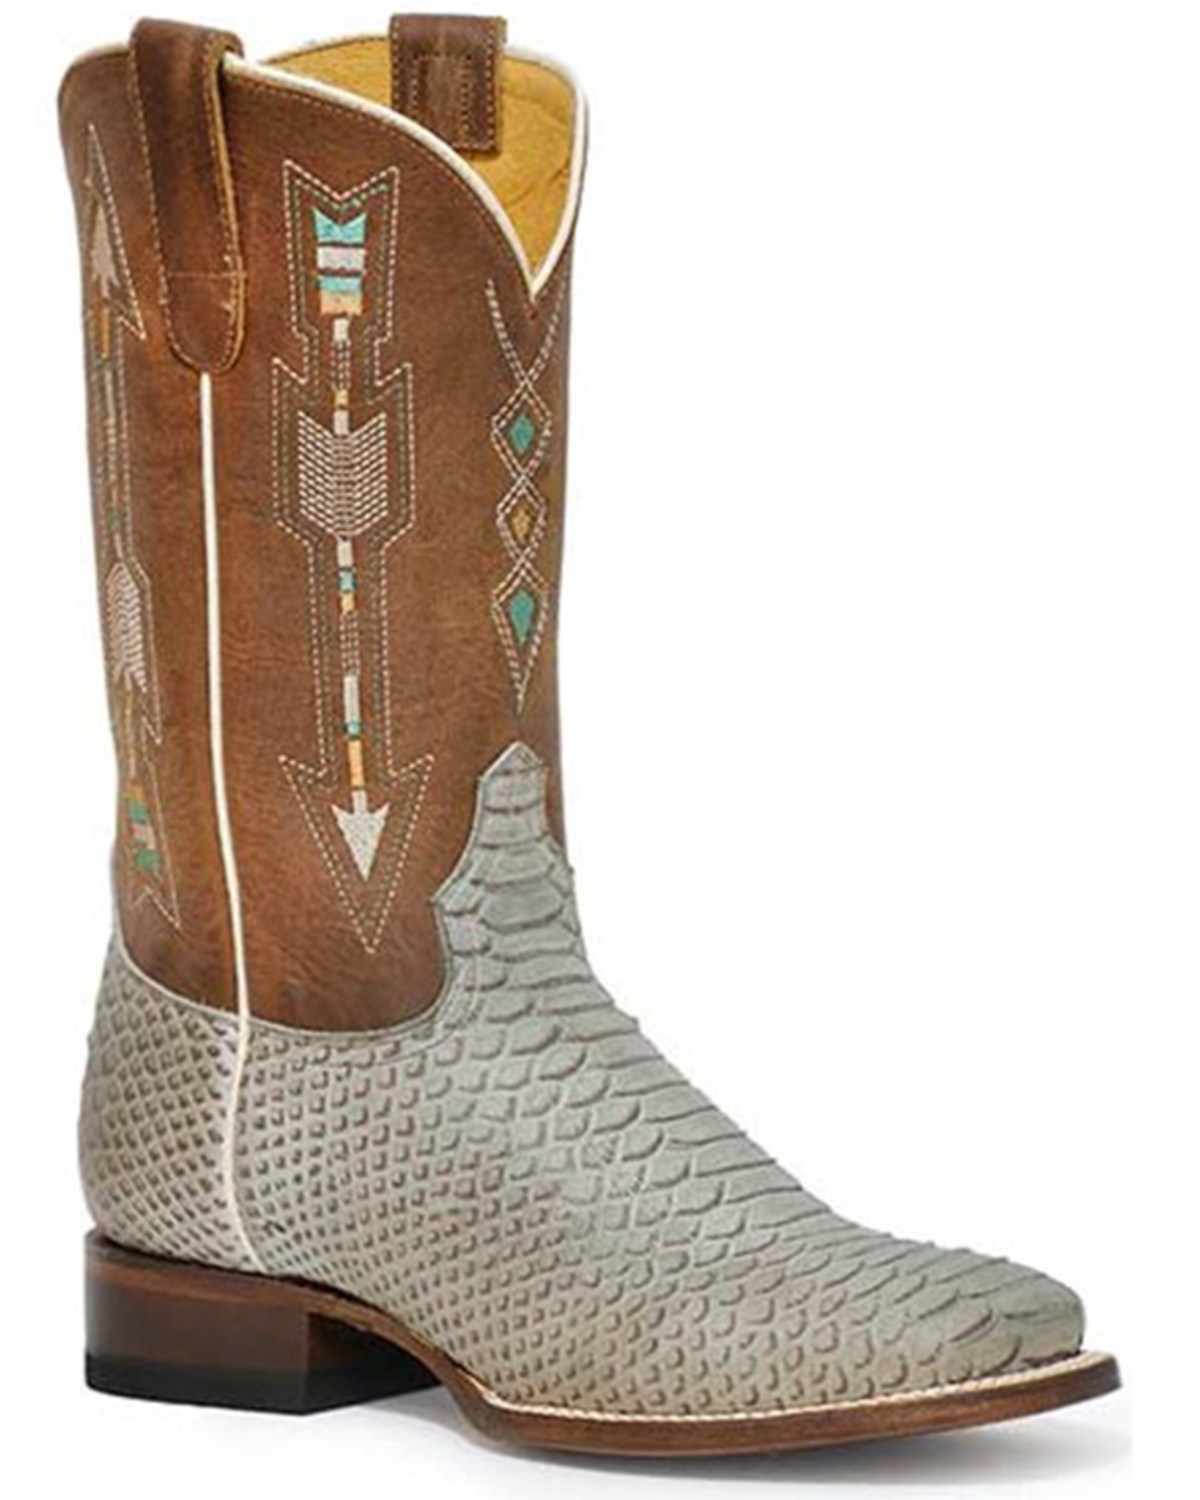 Roper Women's Arrows Python Print Western Boots - Broad Square Toe